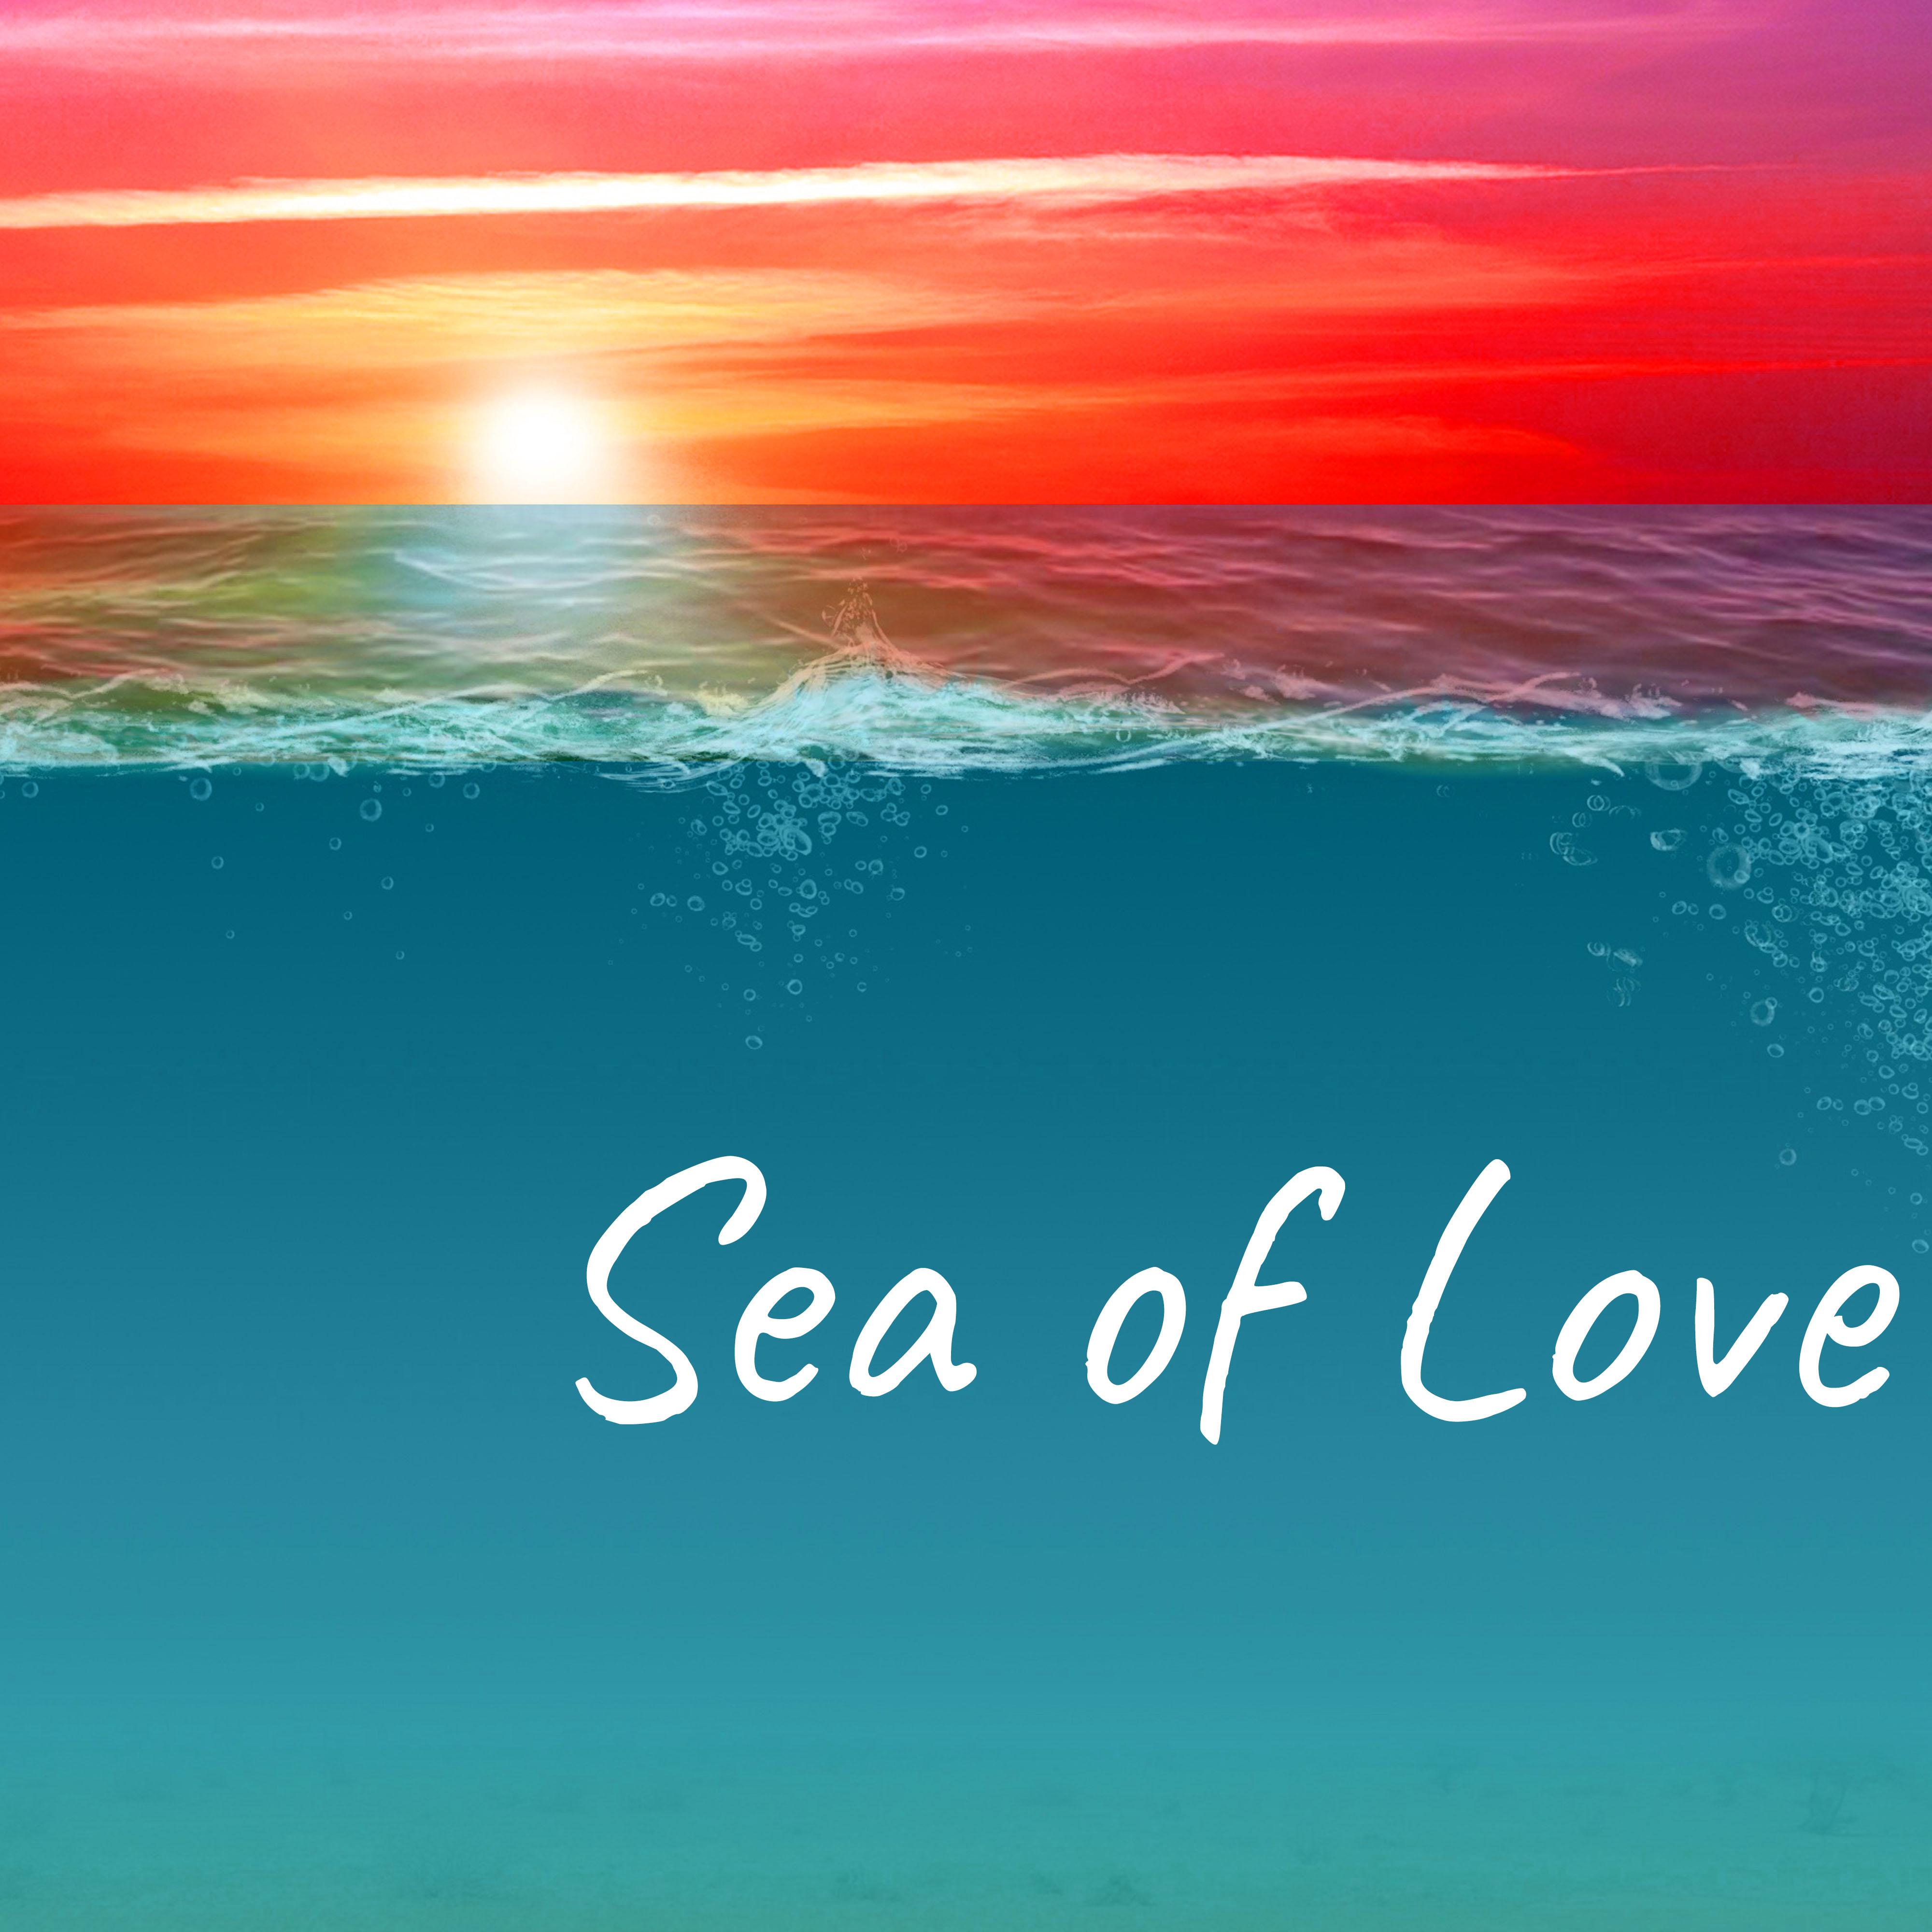 Sea of Love - Ocean Waves for Positivity, Sounds of Nature for Deep Relaxation